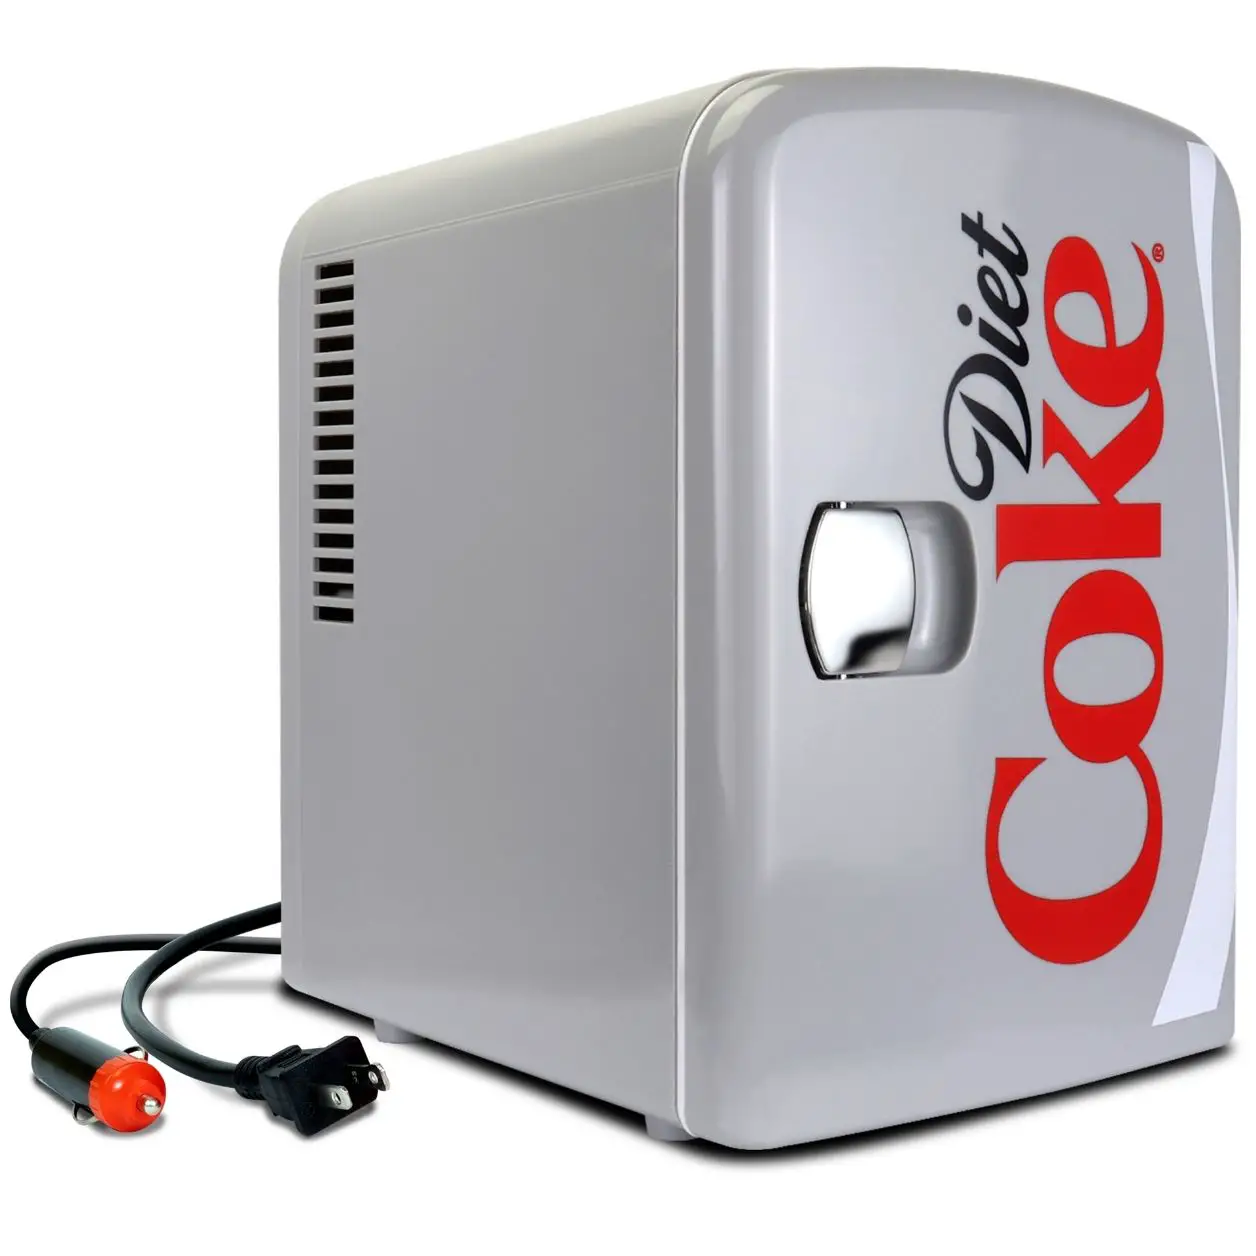 Coca-Cola Mini Fridge For Bedroom, Portable Cooler & Warmer - 4 L/ 6 Can AC/DC Refrigerators For Gifts, Dorm, Boat, Beverages, Skincare And Drinks, Polar Bear, Red